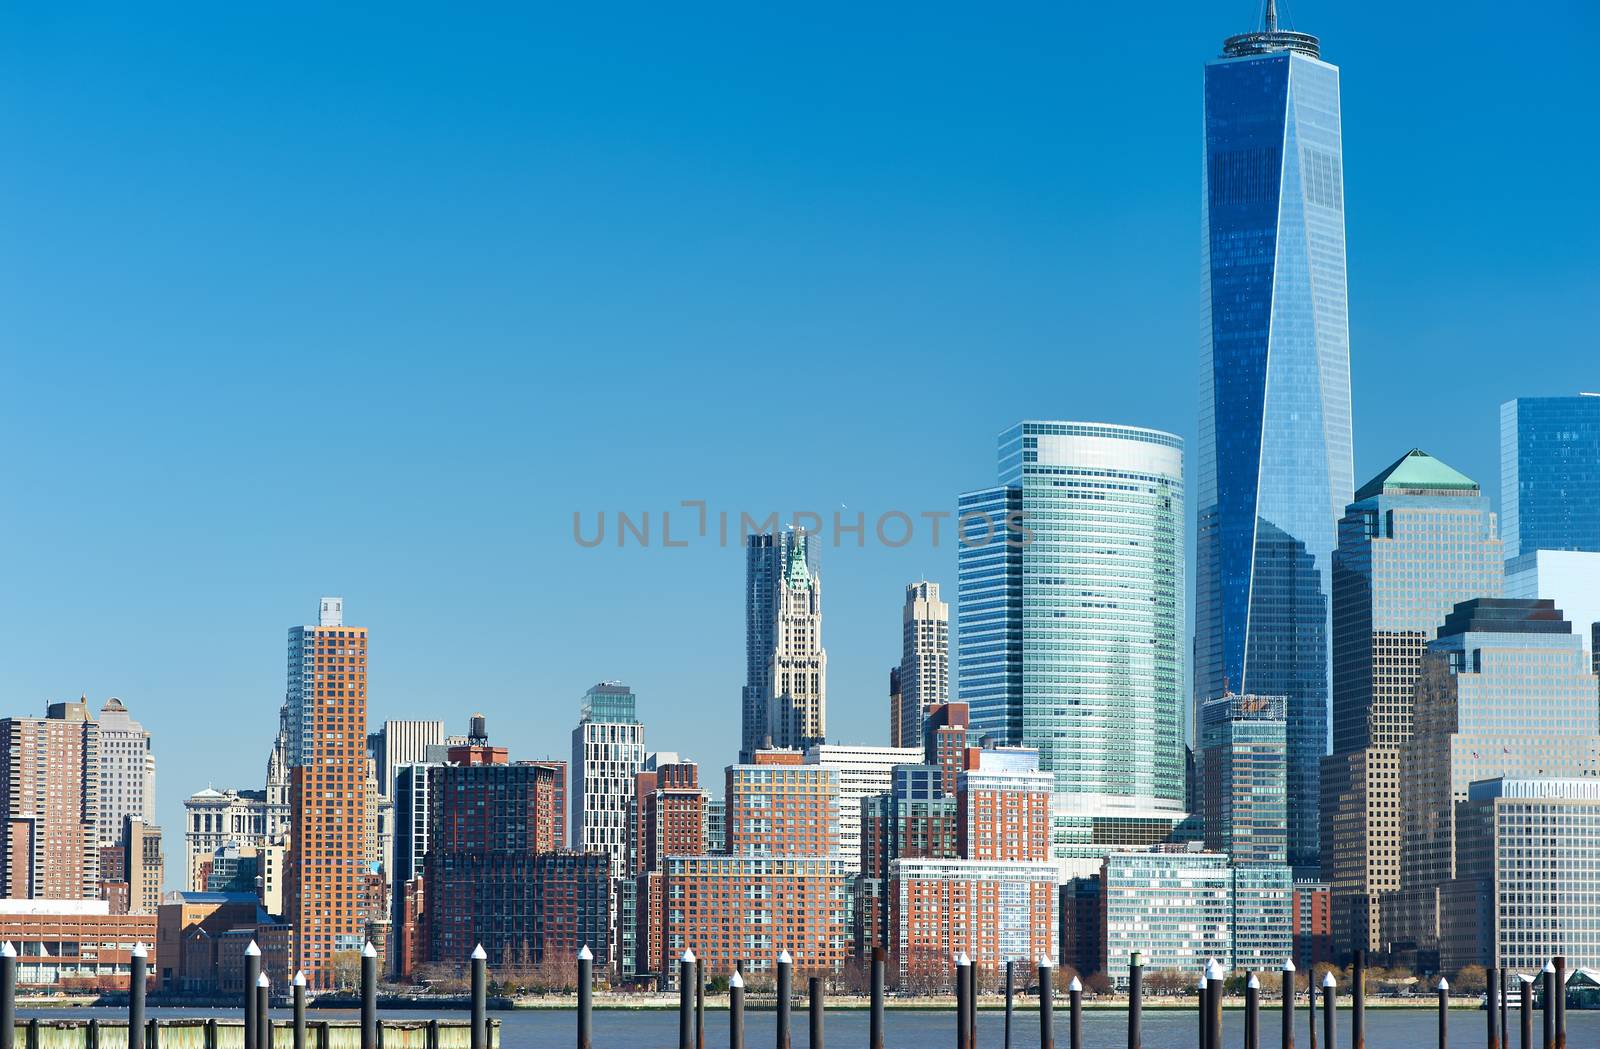 New York City Manhattan skyline with One World Trade Center Tower (AKA Freedom Tower) over Hudson River viewed from New Jersey